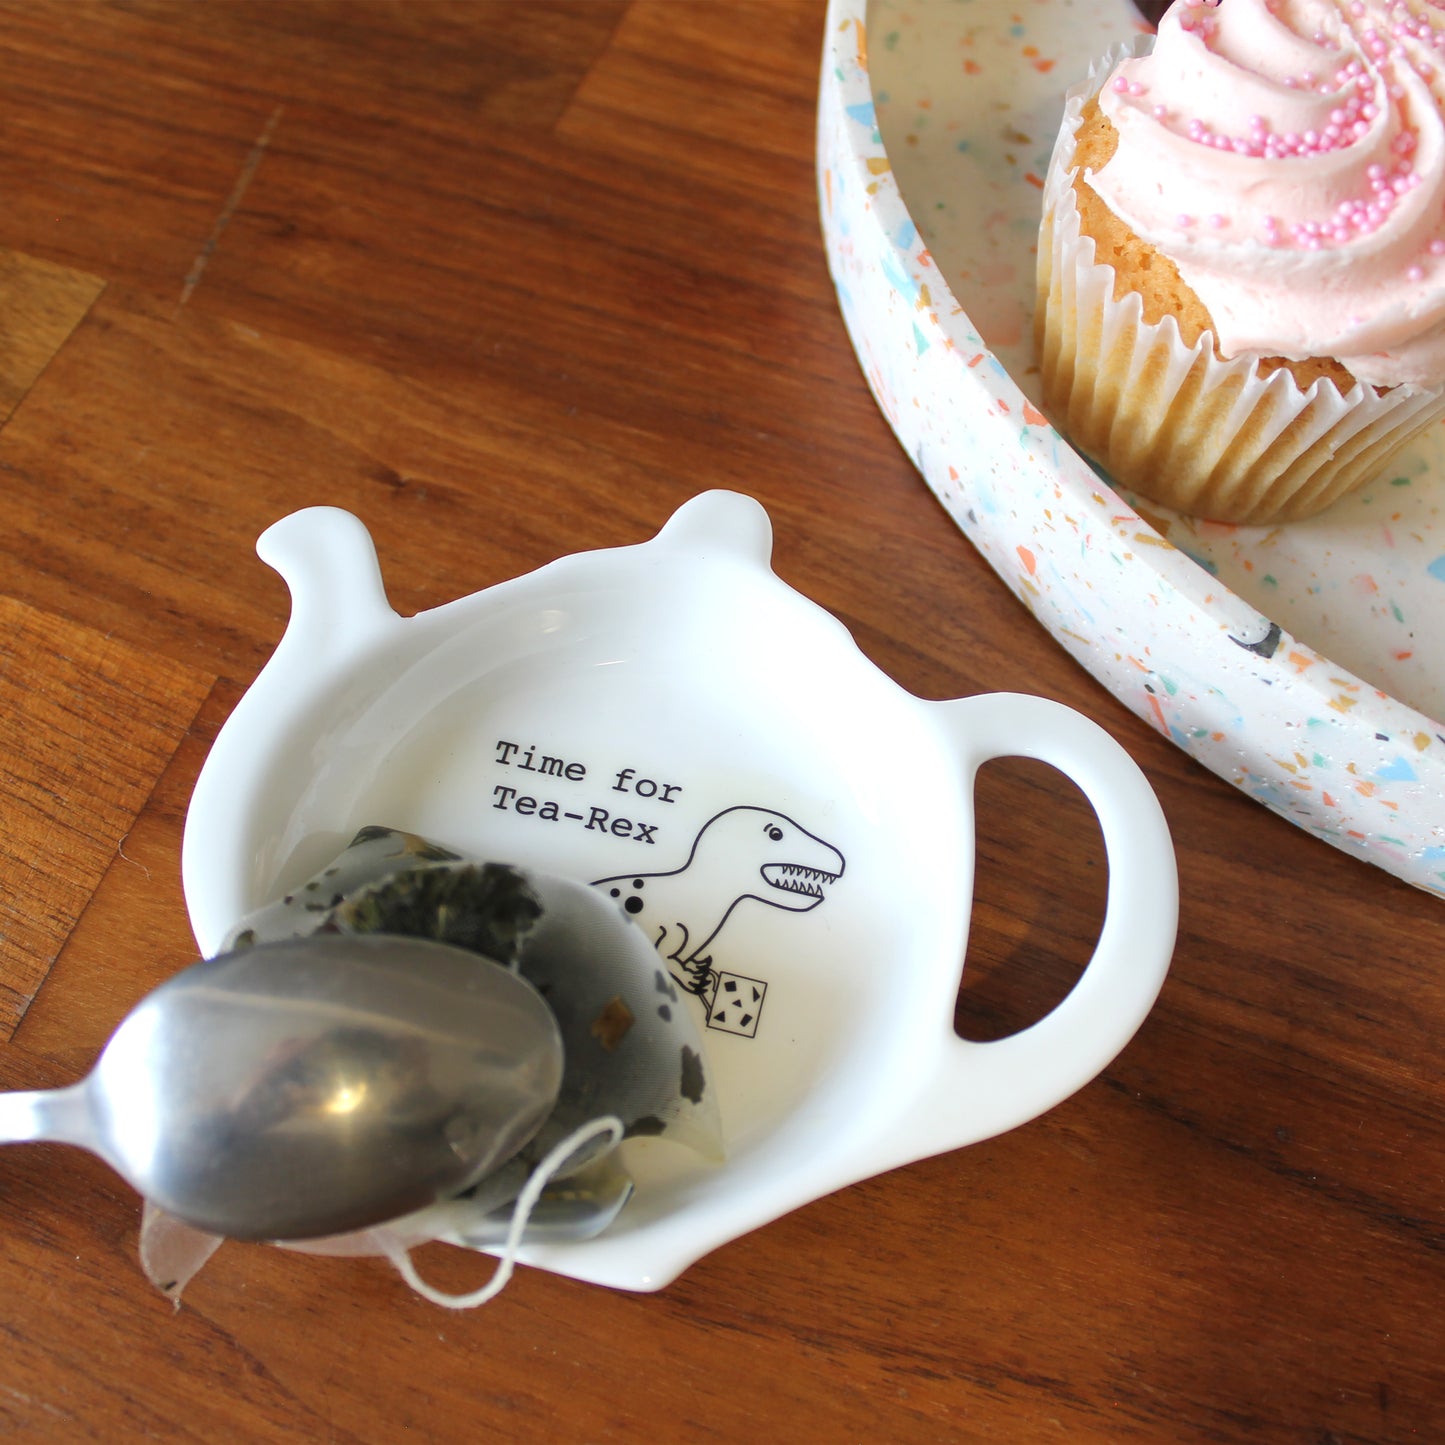 Time for Tea-Rex Teabag Tidy with a teabag and spoon resting on it. There is a pink cupcake on a terrazzo tray next to it